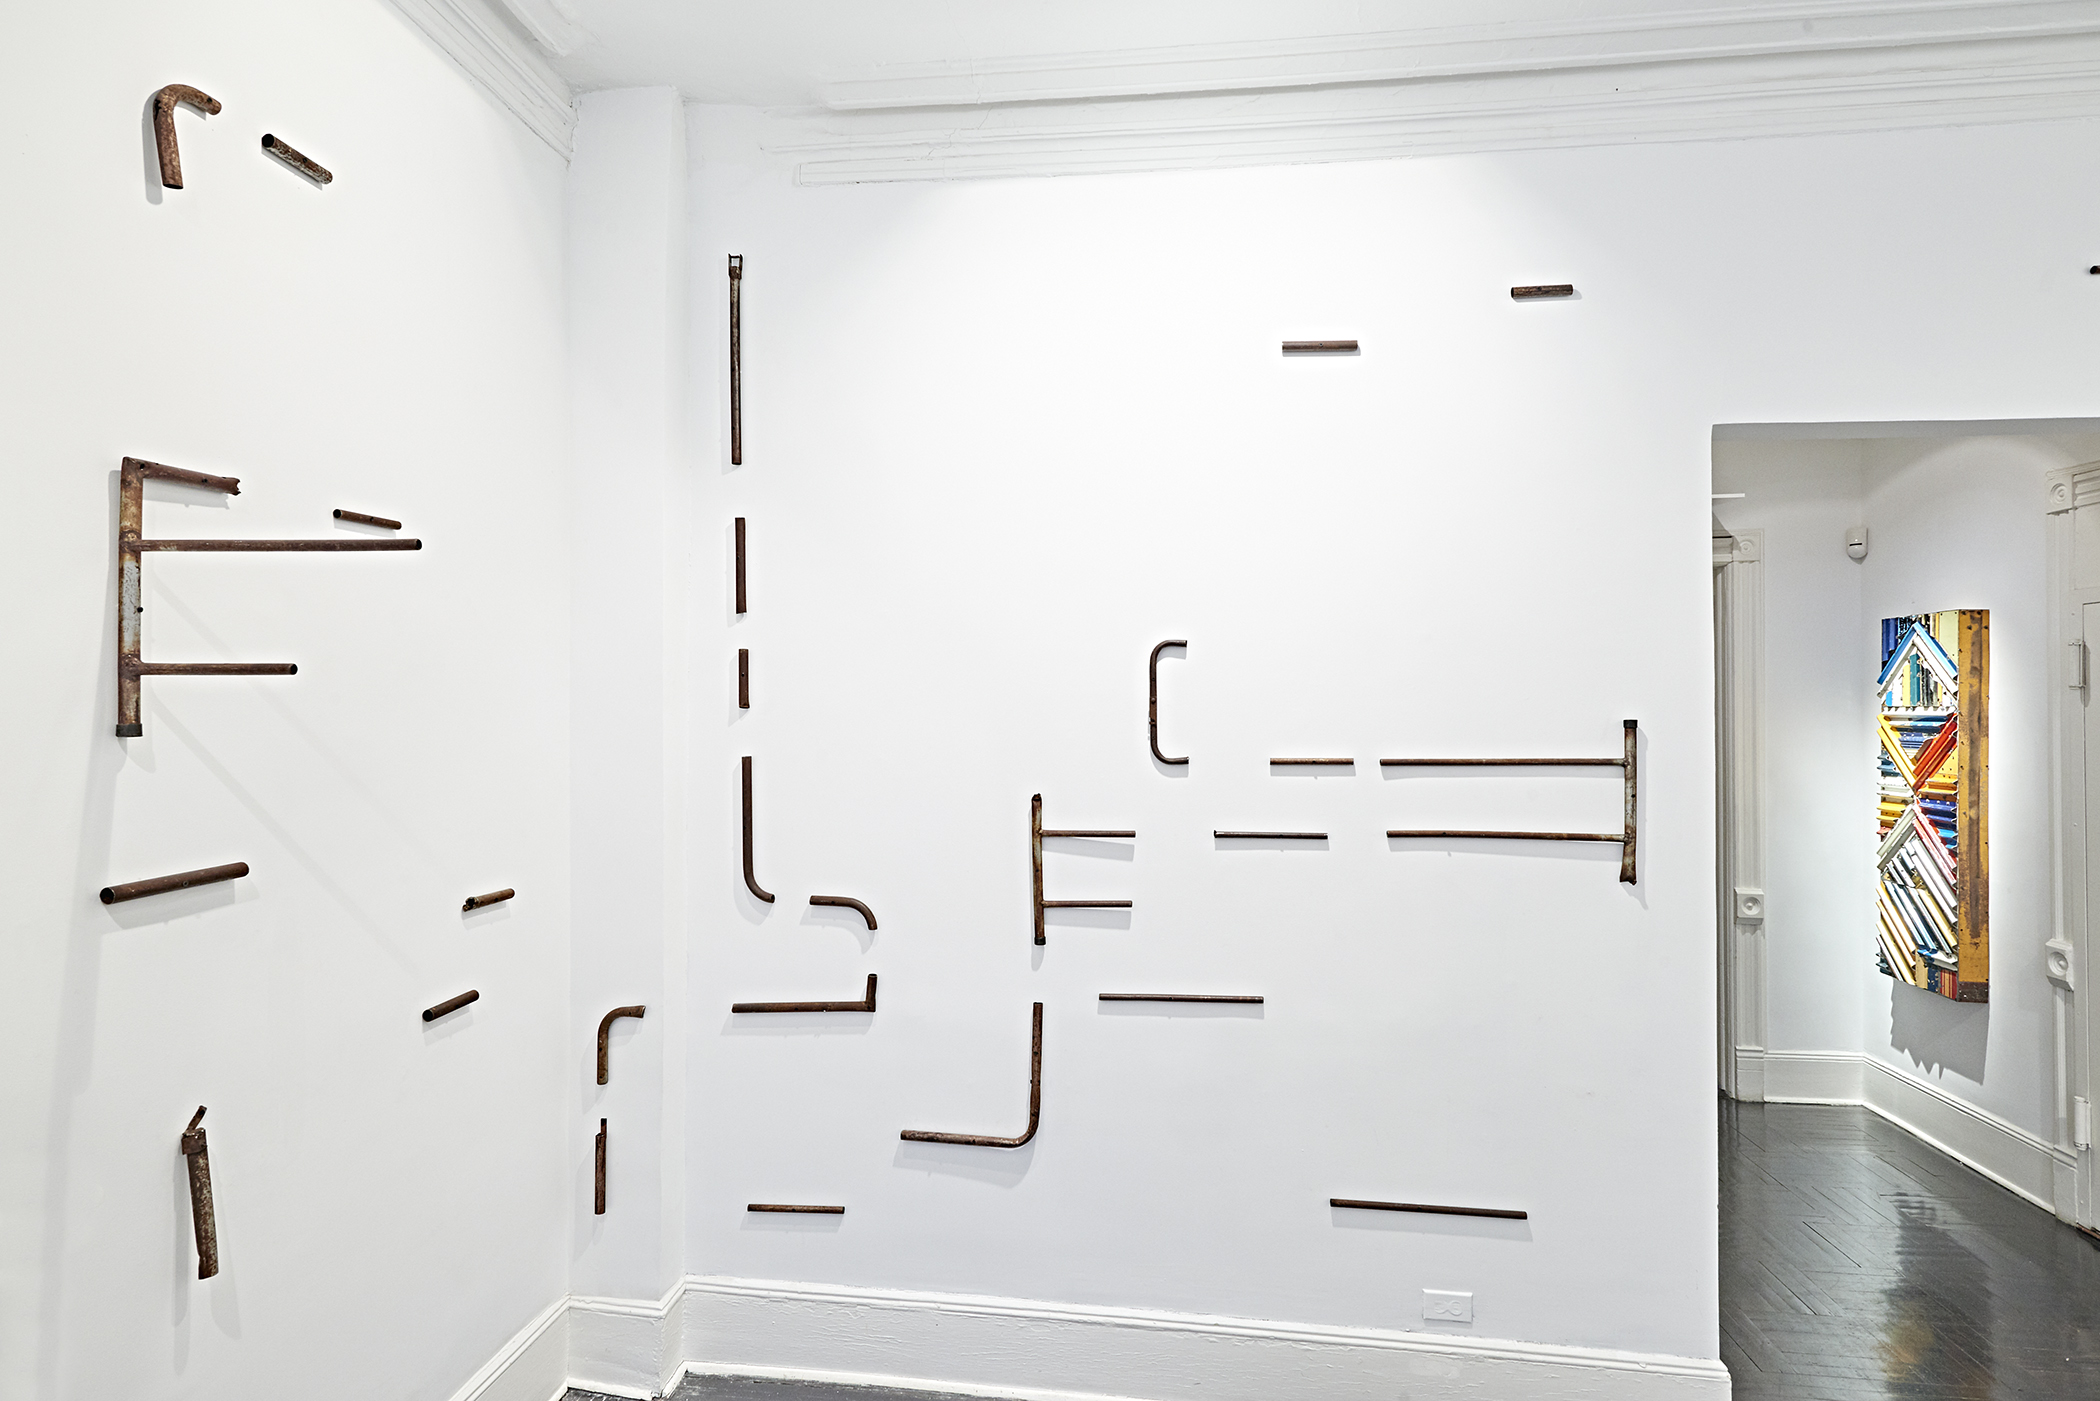  View of "Displacements &amp; Reconstructions" at Henrique Faria Fine Art, New York City.  Photo credit: Arturo Sánchez 